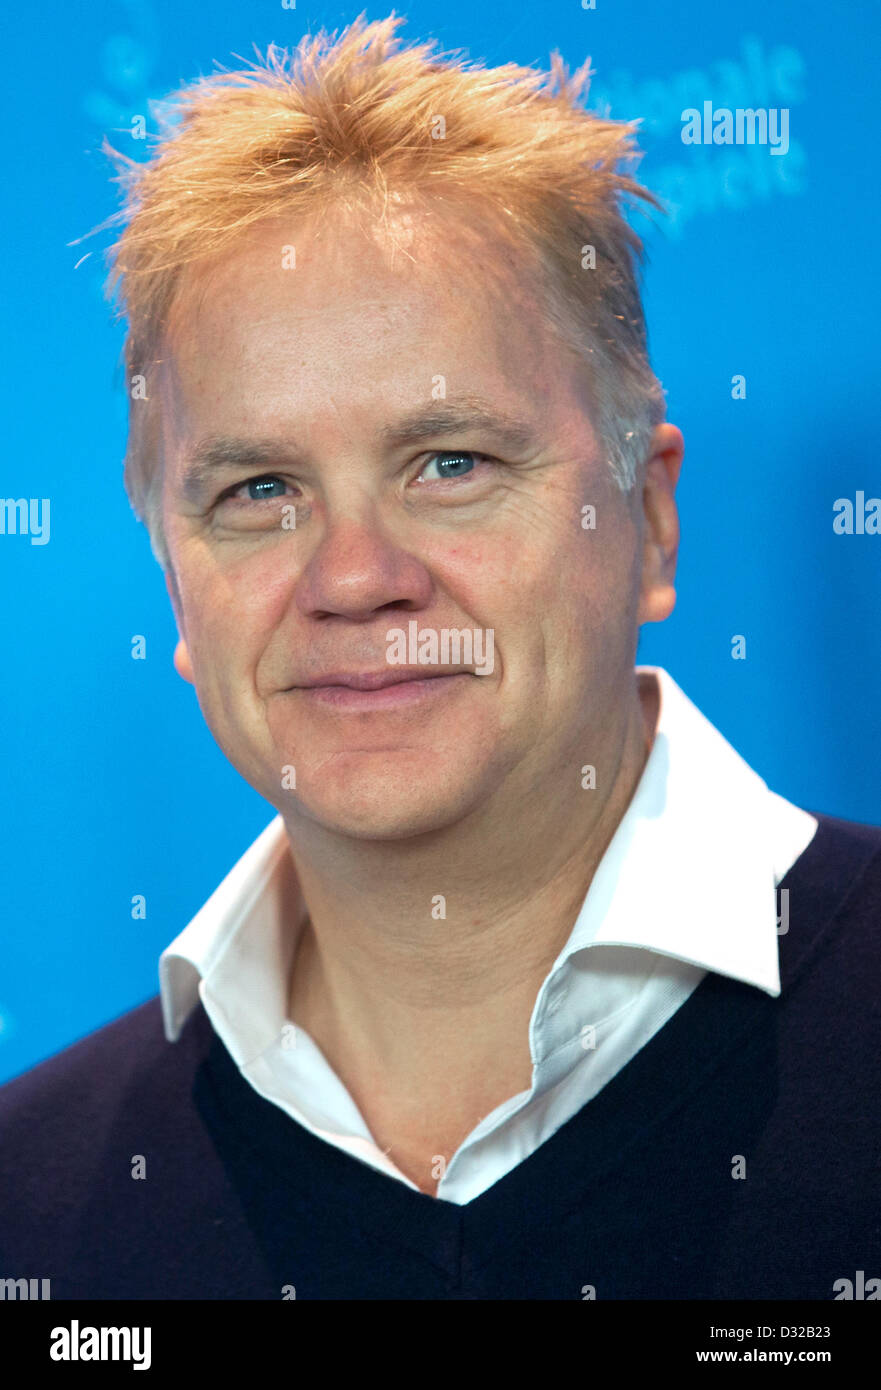 Internationale Jury member actor Tim Robbins (USA) poses at a photocall during the 63rd annual Berlin International Film Festival, in Berlin, Germany, 07 February 2013. Photo: Michael Kappeler/dpa Stock Photo